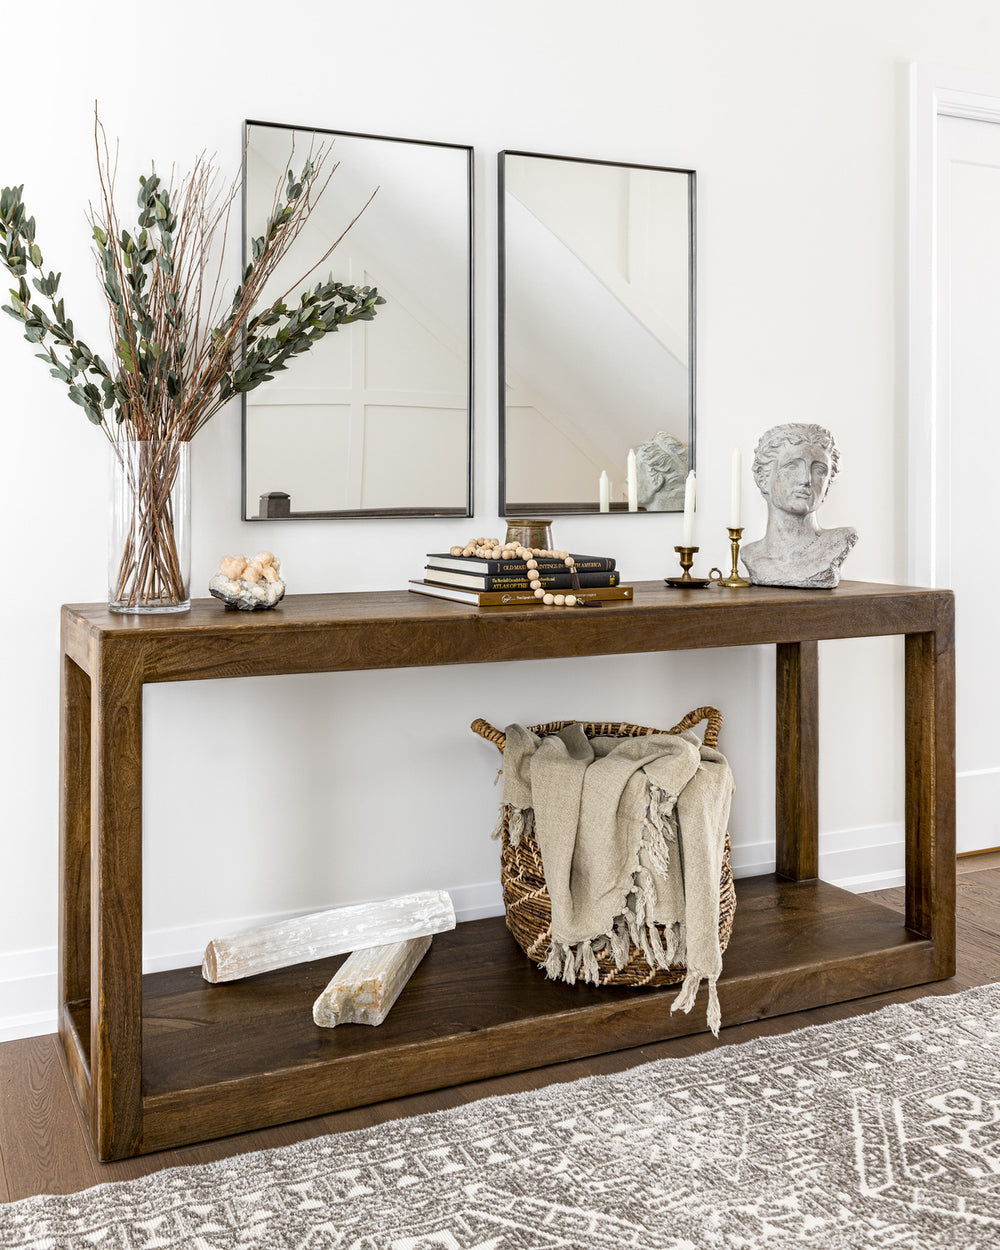 Zeolite Crystal on console, lifestyle photo.